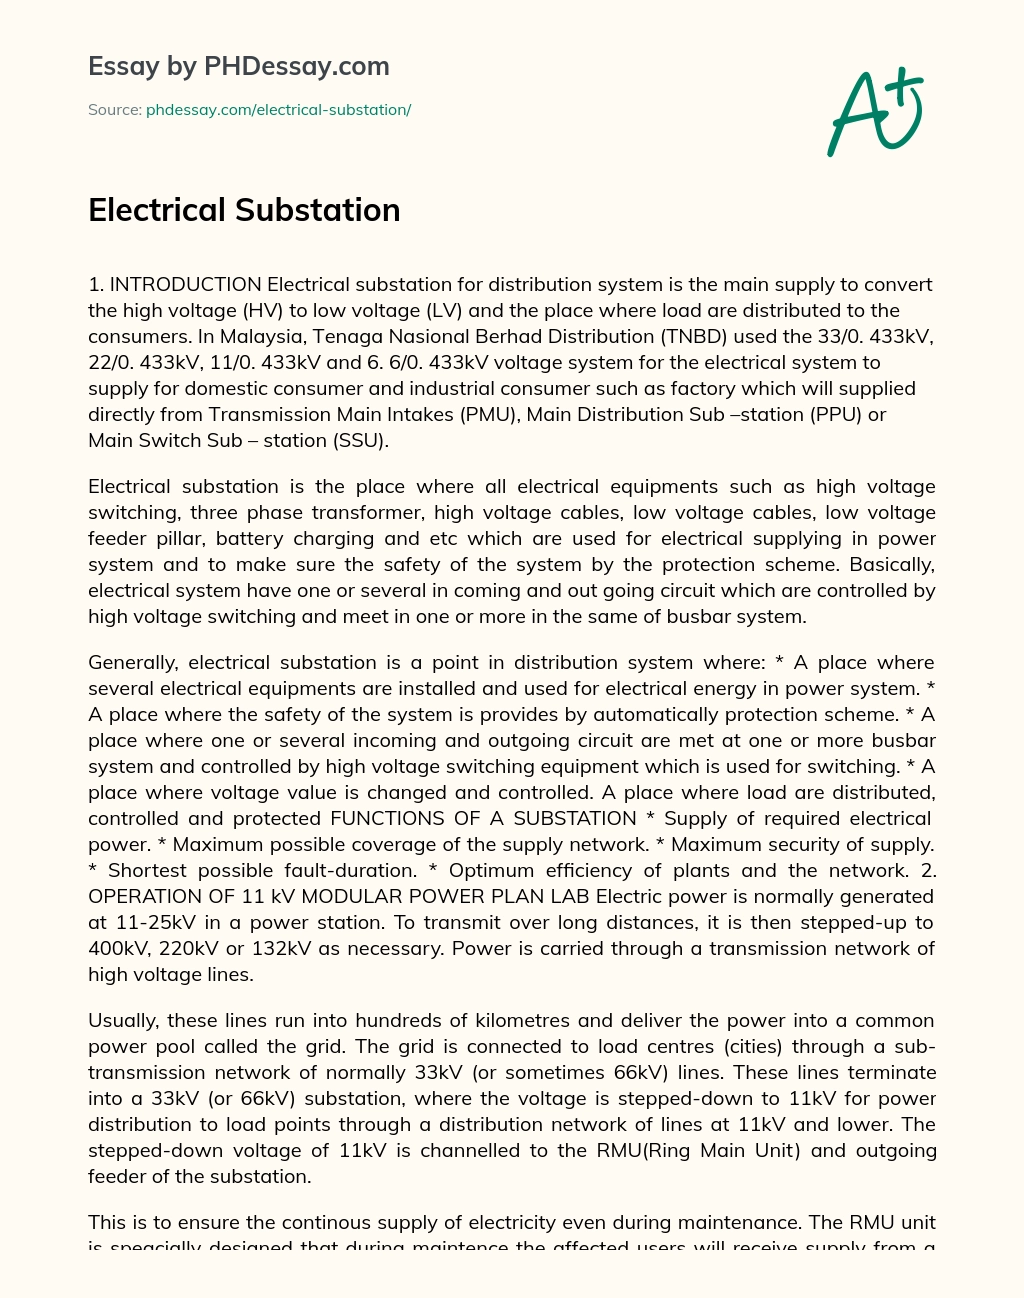 Electrical Substation essay